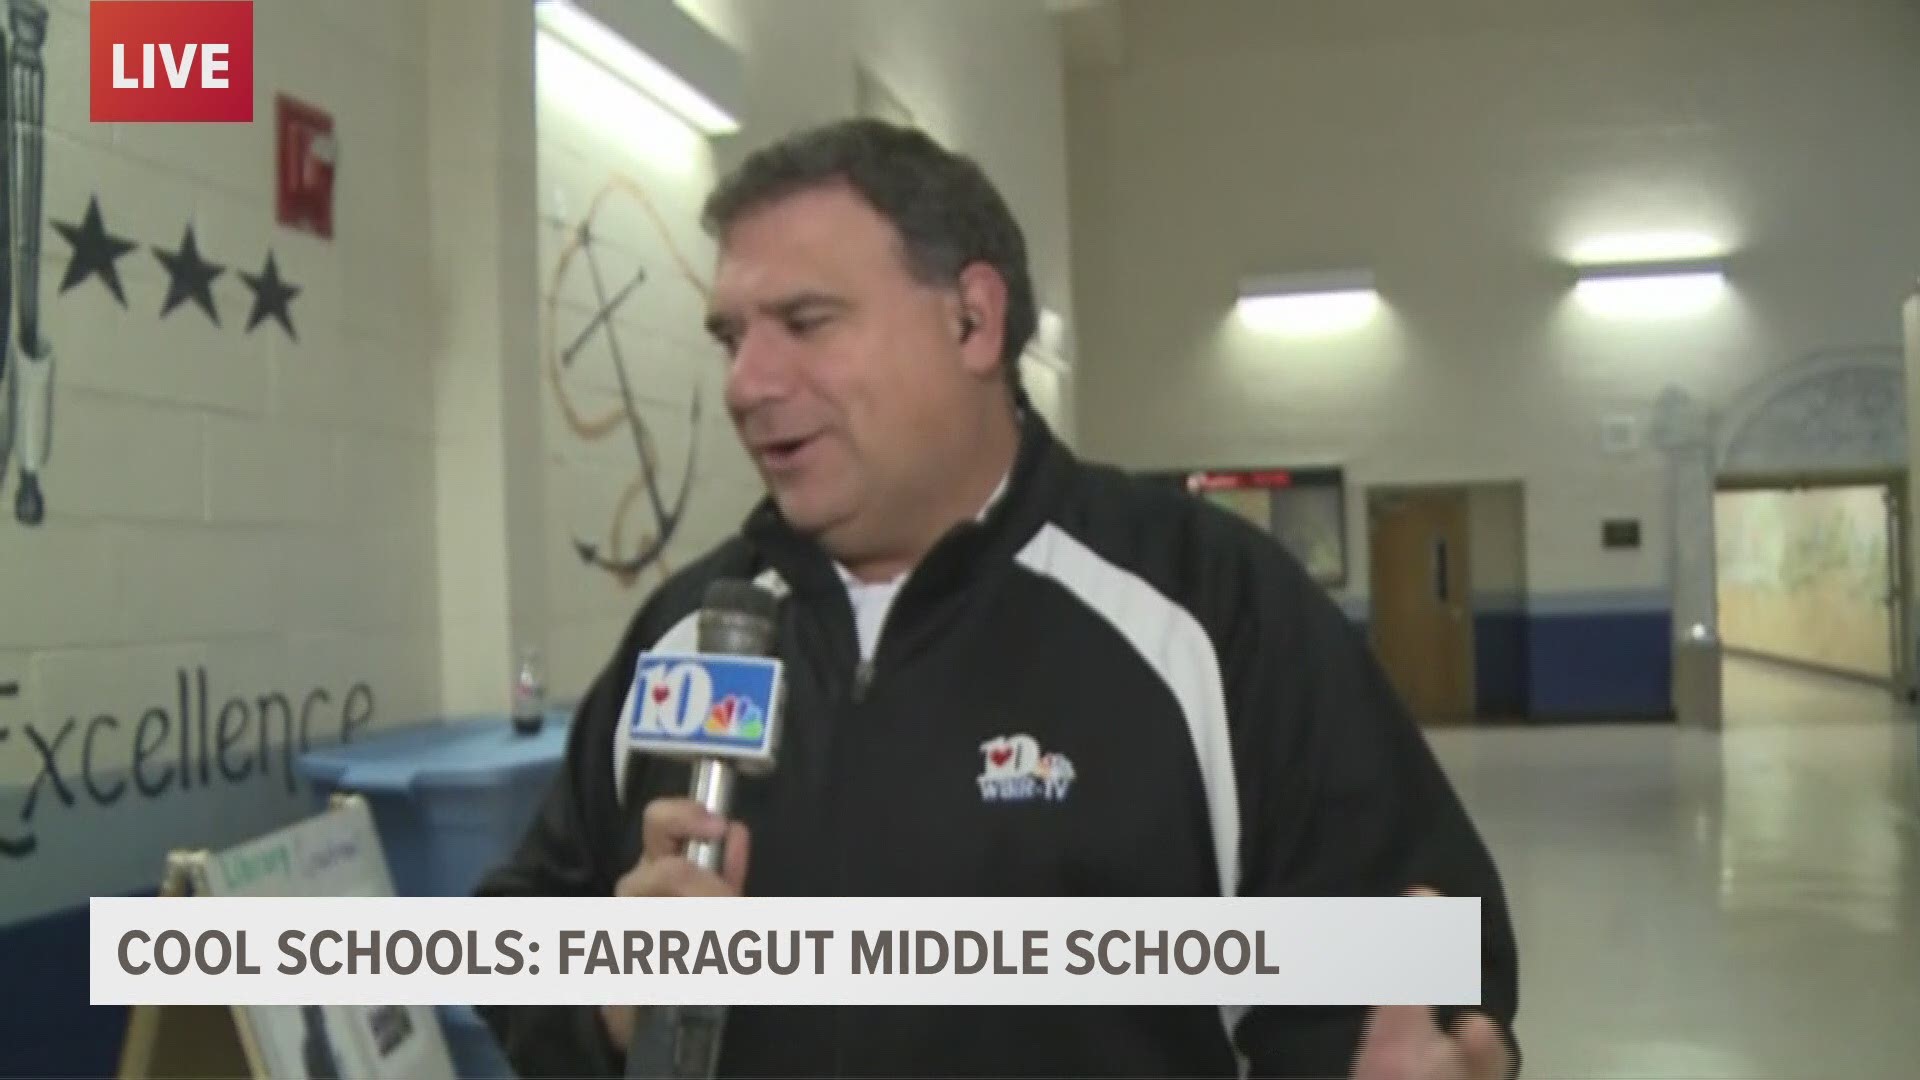 10News Anchor Russell Biven checked out Farragut for this week's cool school!